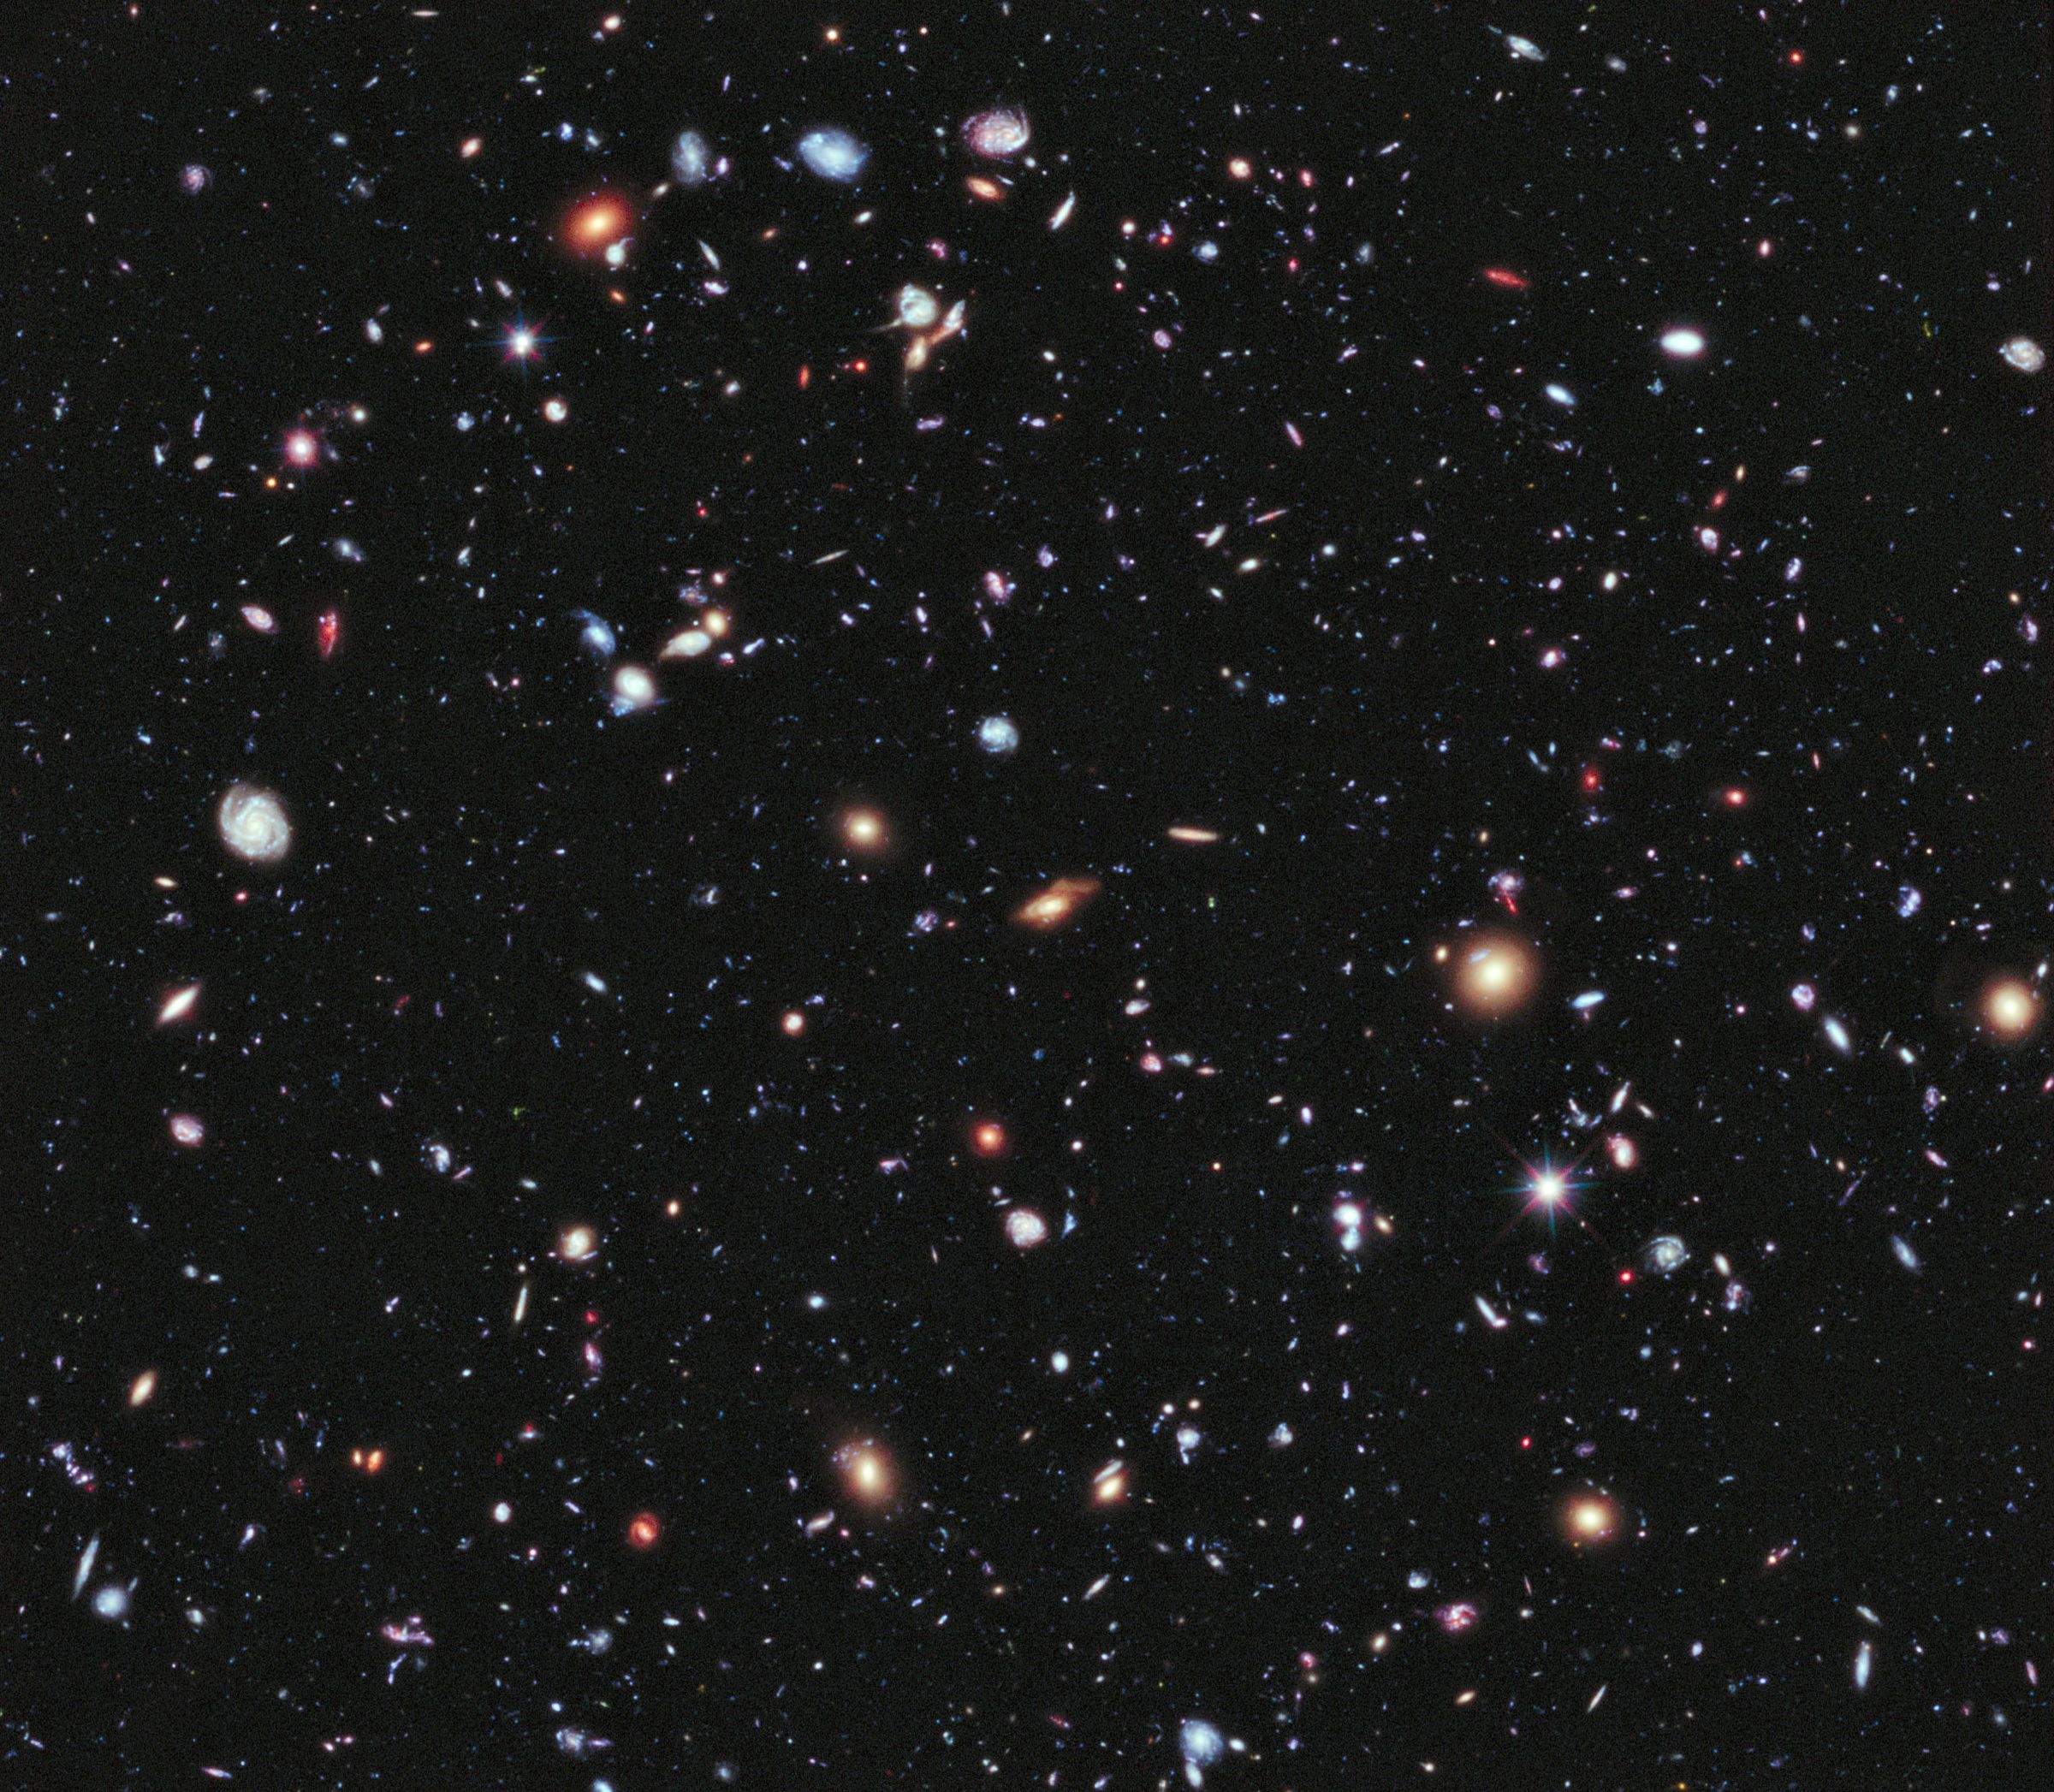 Multicolored galaxies scattered across a deep black background